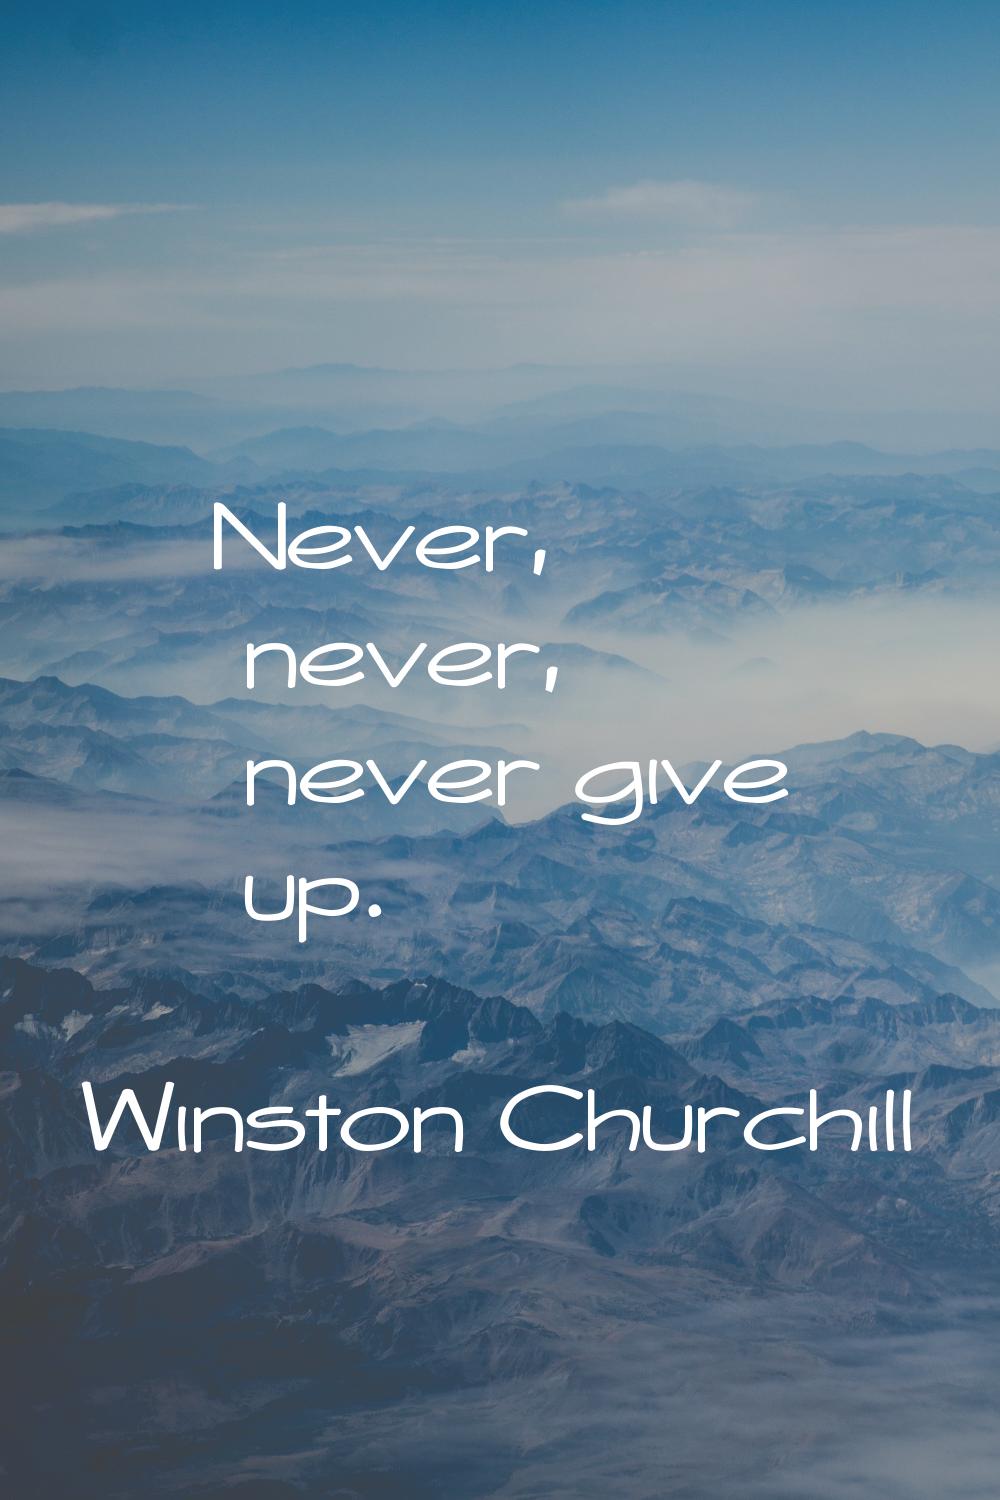 Never, never, never give up.